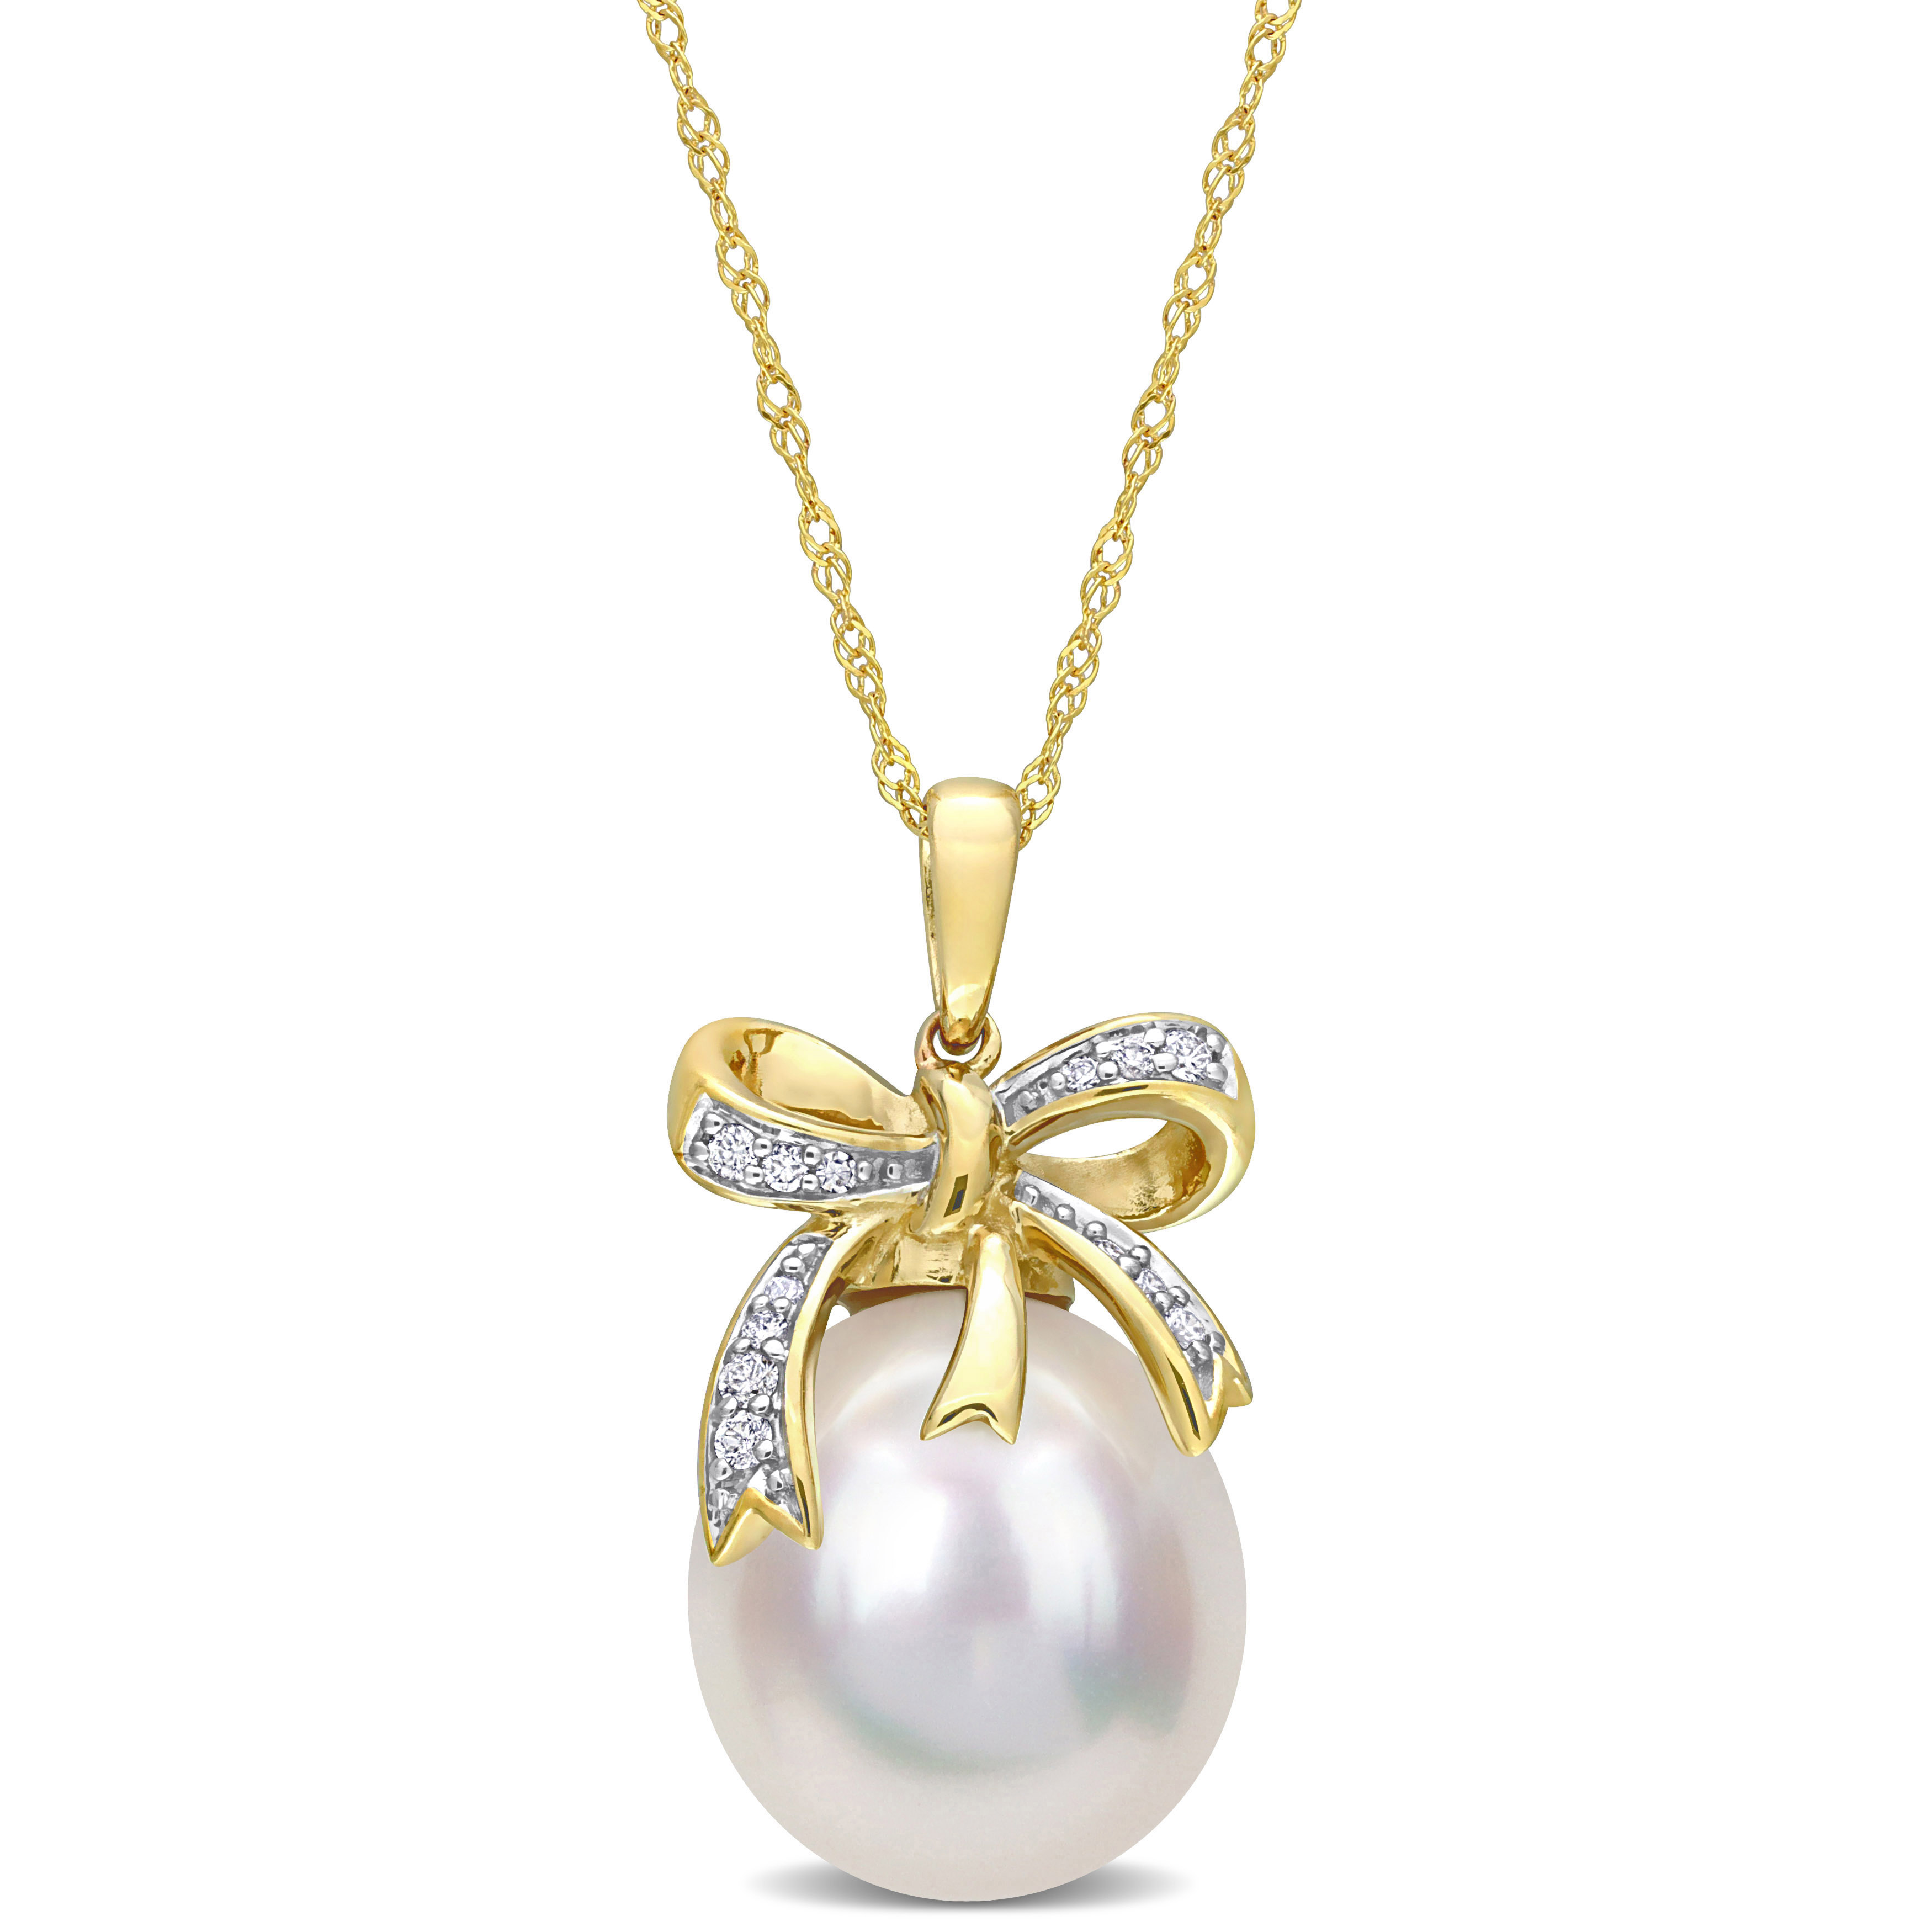 12-12.5 MM South Sea Cultured Pearl and 1/10 CT TW Diamond Bow Pendant with Chain in 10k Yellow Gold